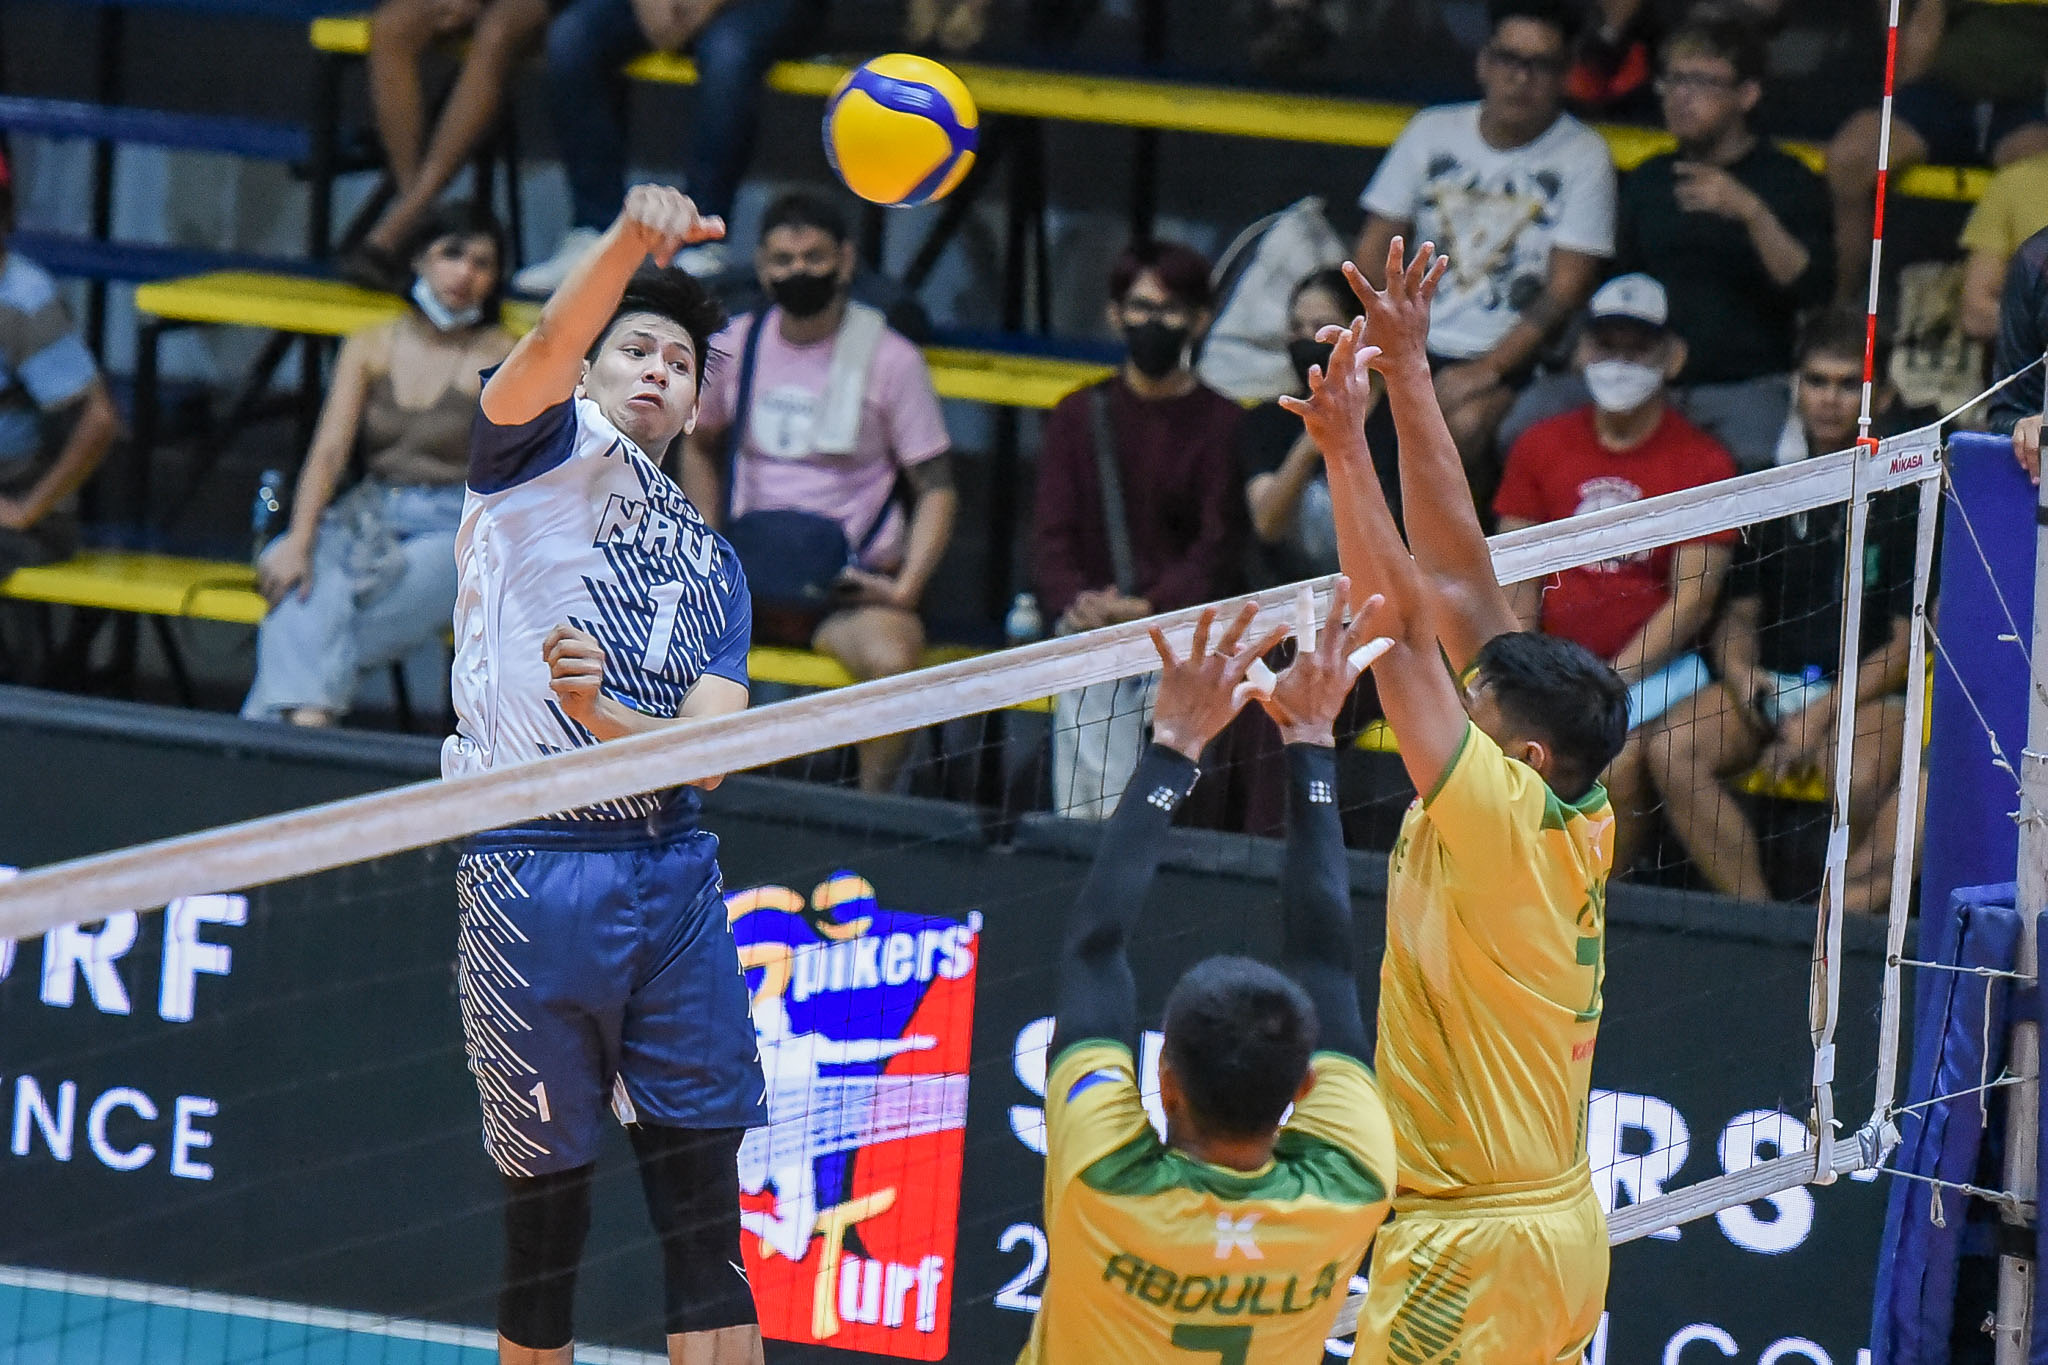  Jao Umandal leads PGJC-Navy in latest win in Spikers' Turf. 